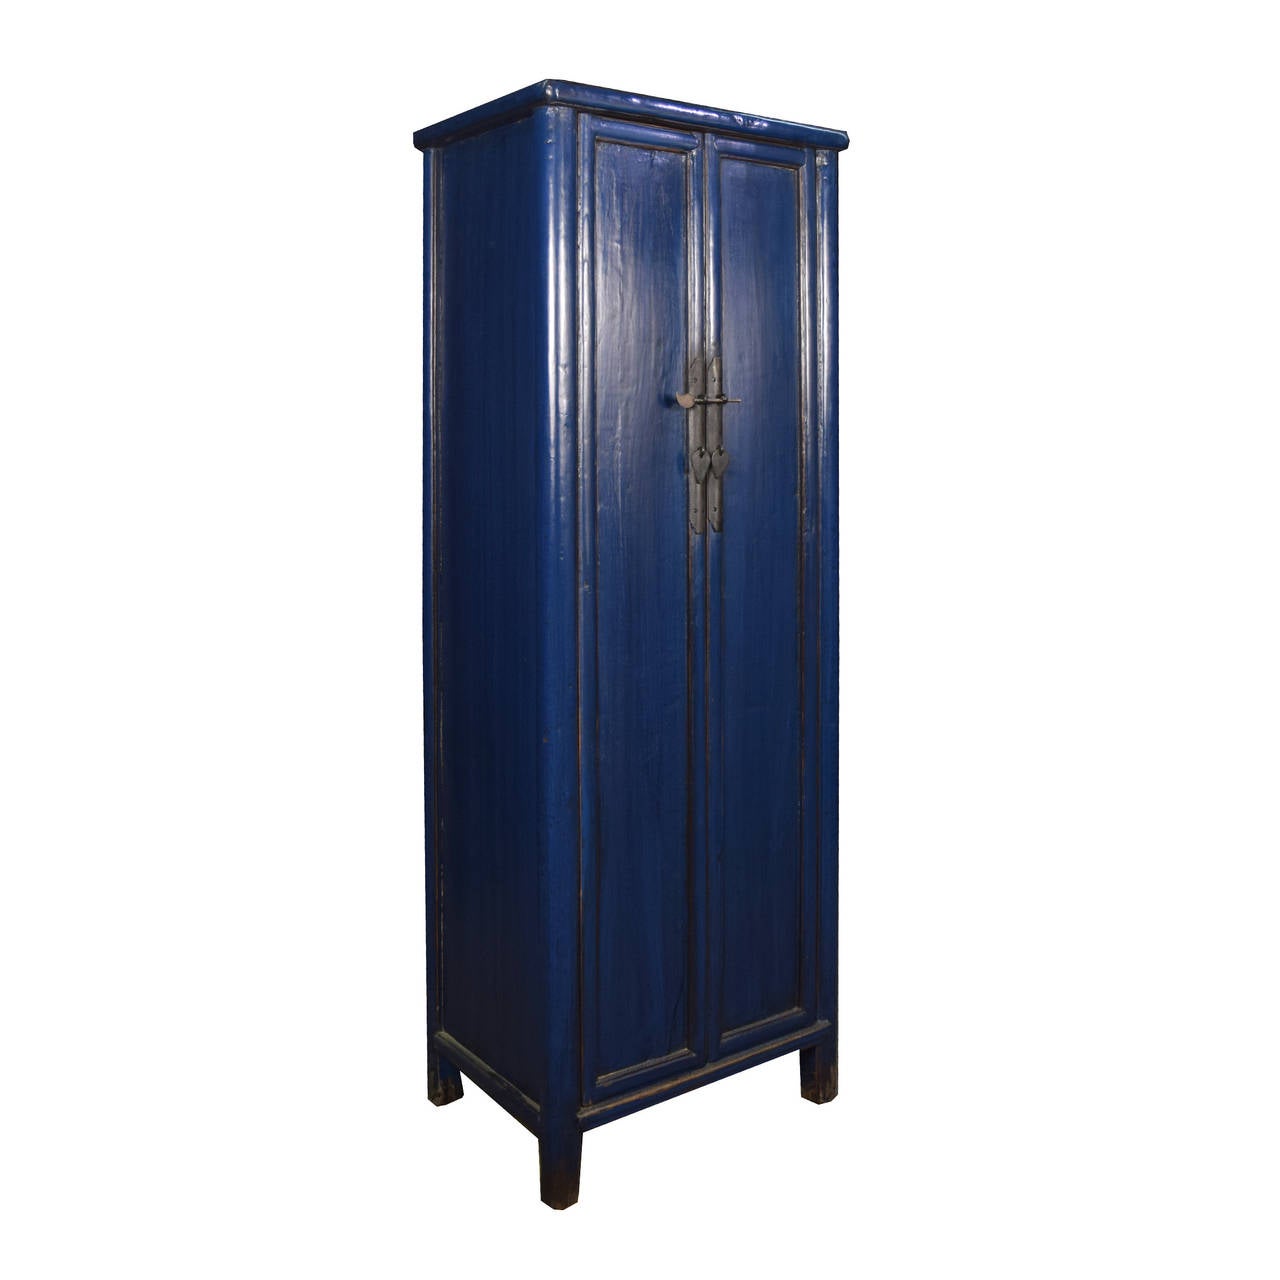 A c.1900 lapis blue narrow cabinet from Hebei Province, China with two doors that open to three shelves and two drawers.

Pagoda Red Collection # BJDD037